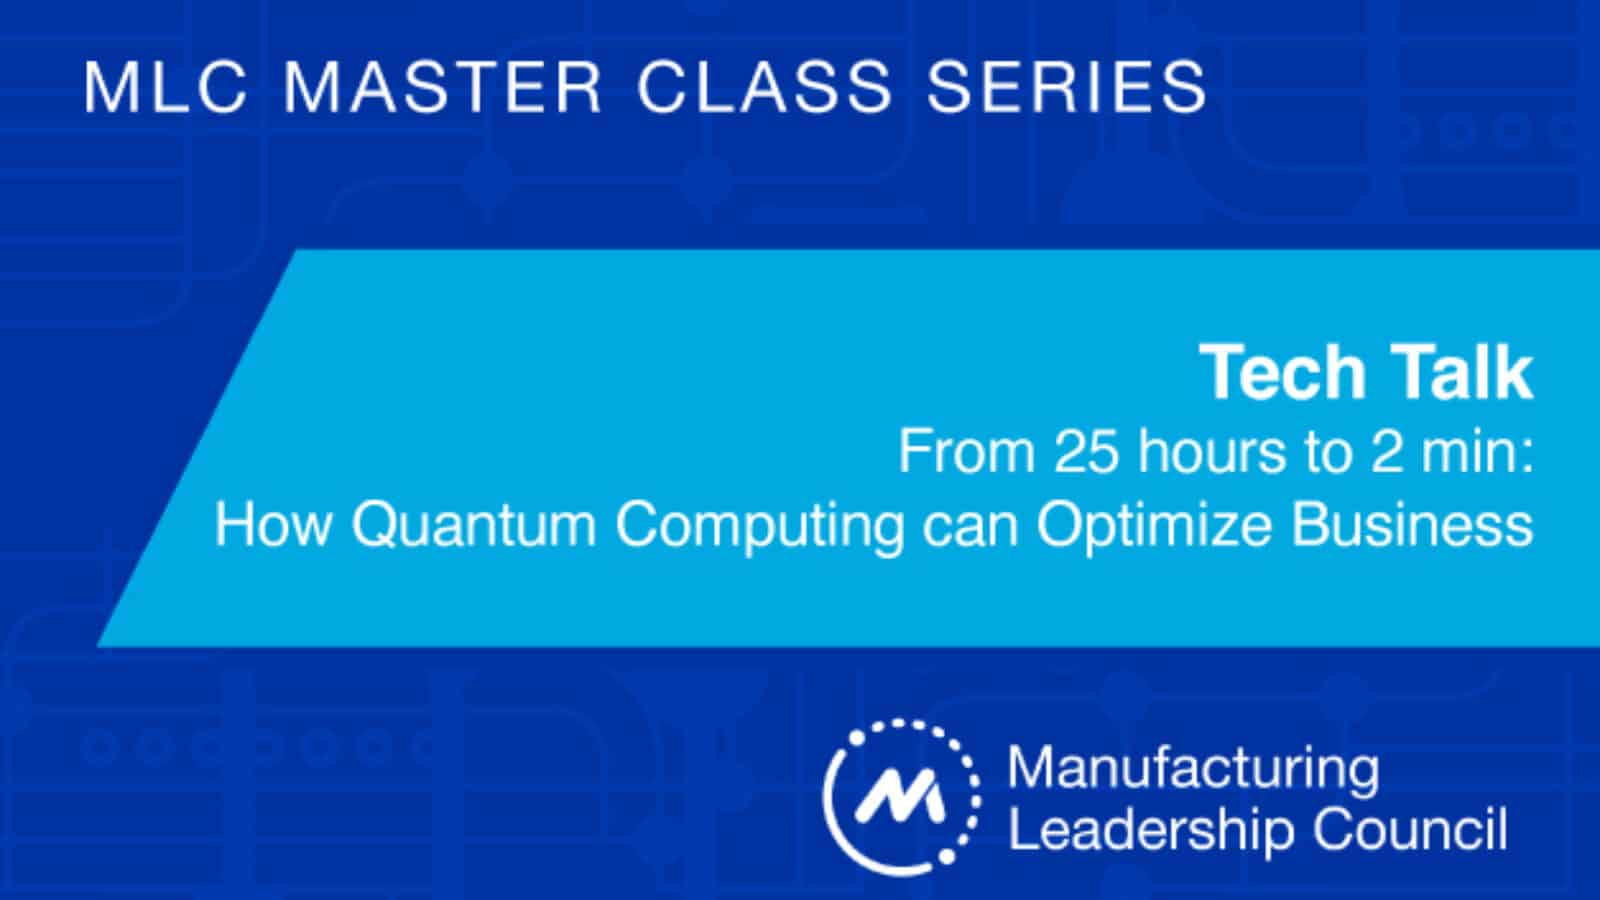 MLC Tech Talk - From 25 hours to 2 min: How Quantum Computing can Optimize Business